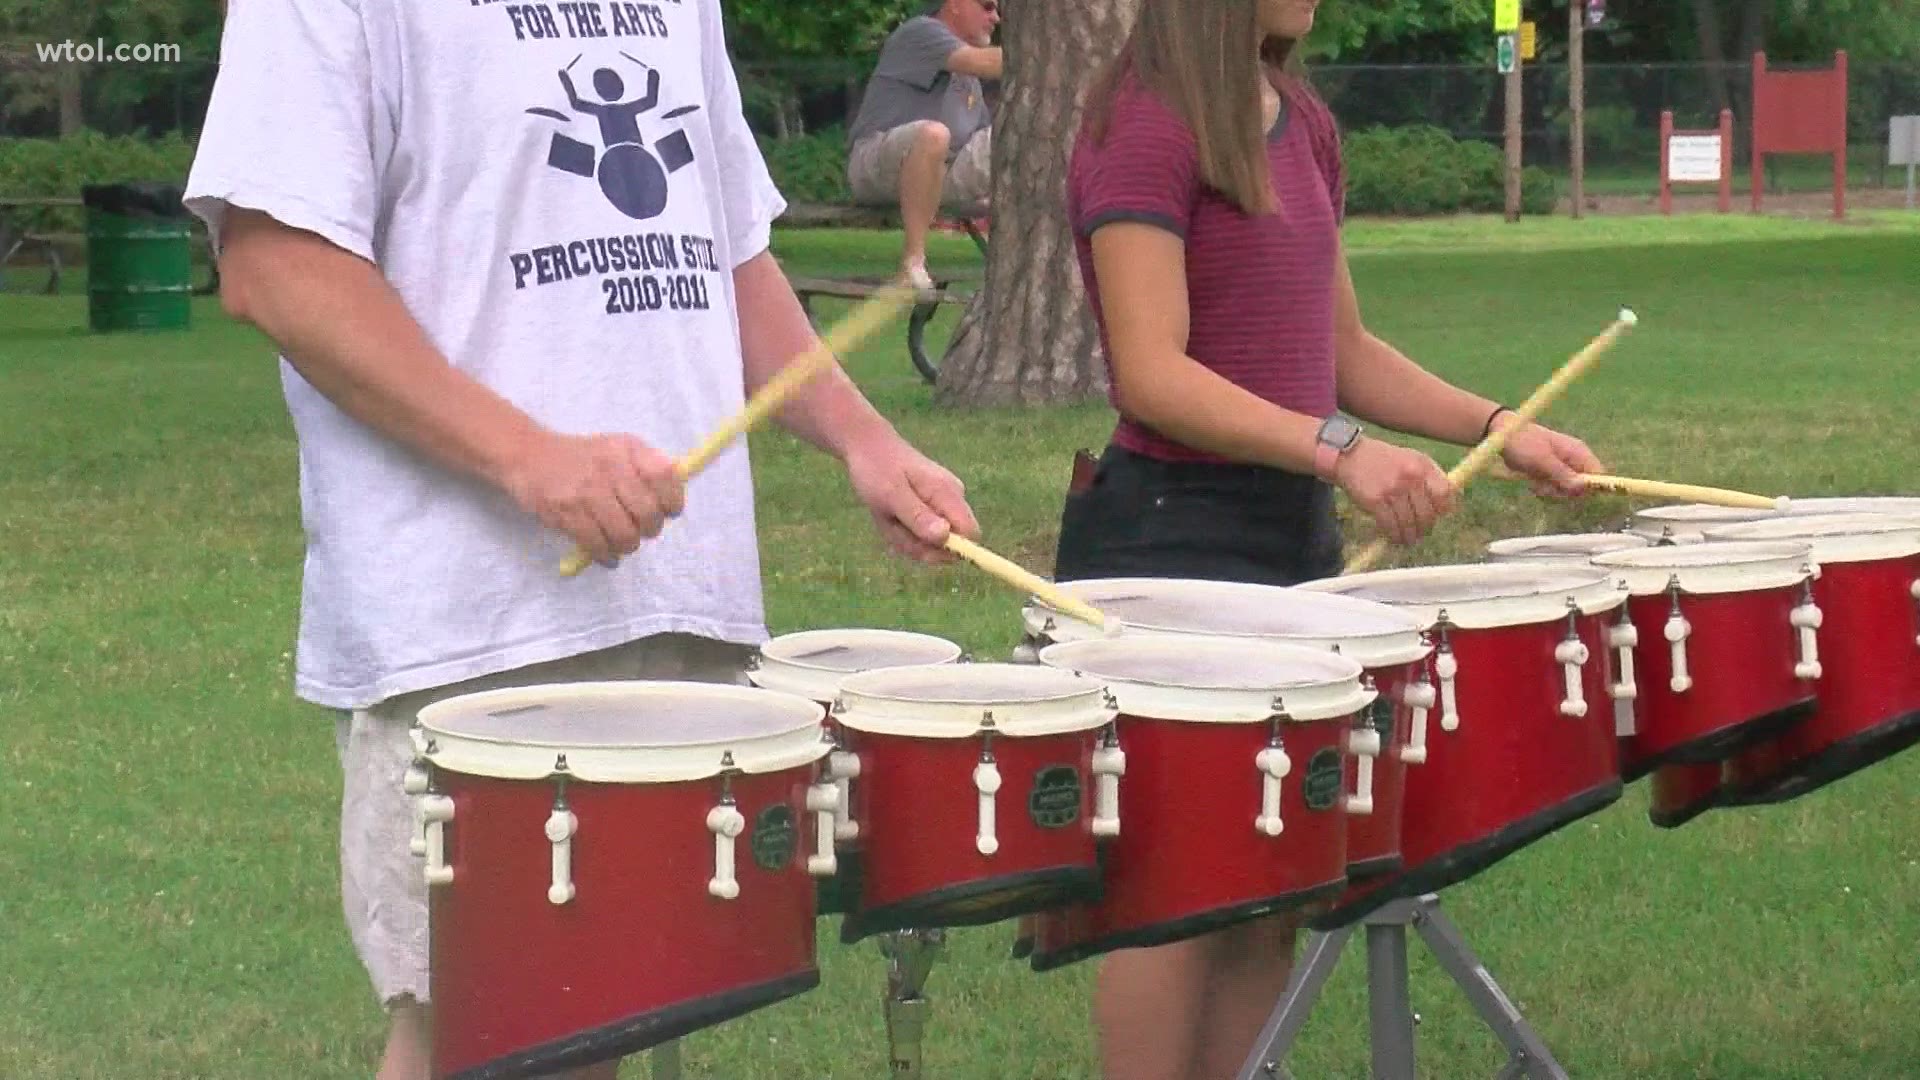 Thanks to a grant from the city of Toledo, instructors will be teaching kids of all ages to play the drums at each of the parks, all at the same time.